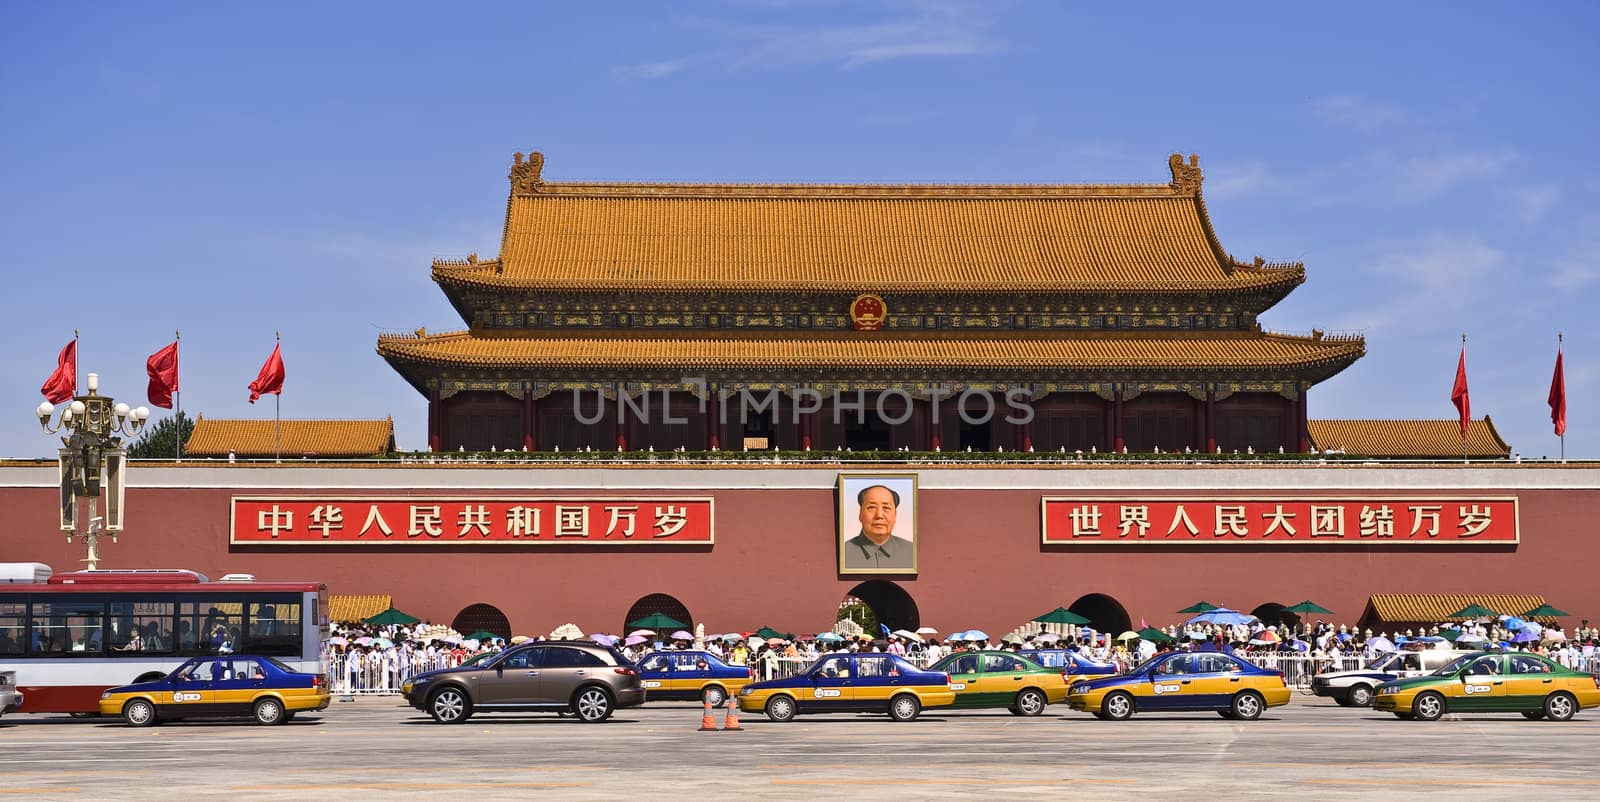 Forbidden City entrance by Marcus